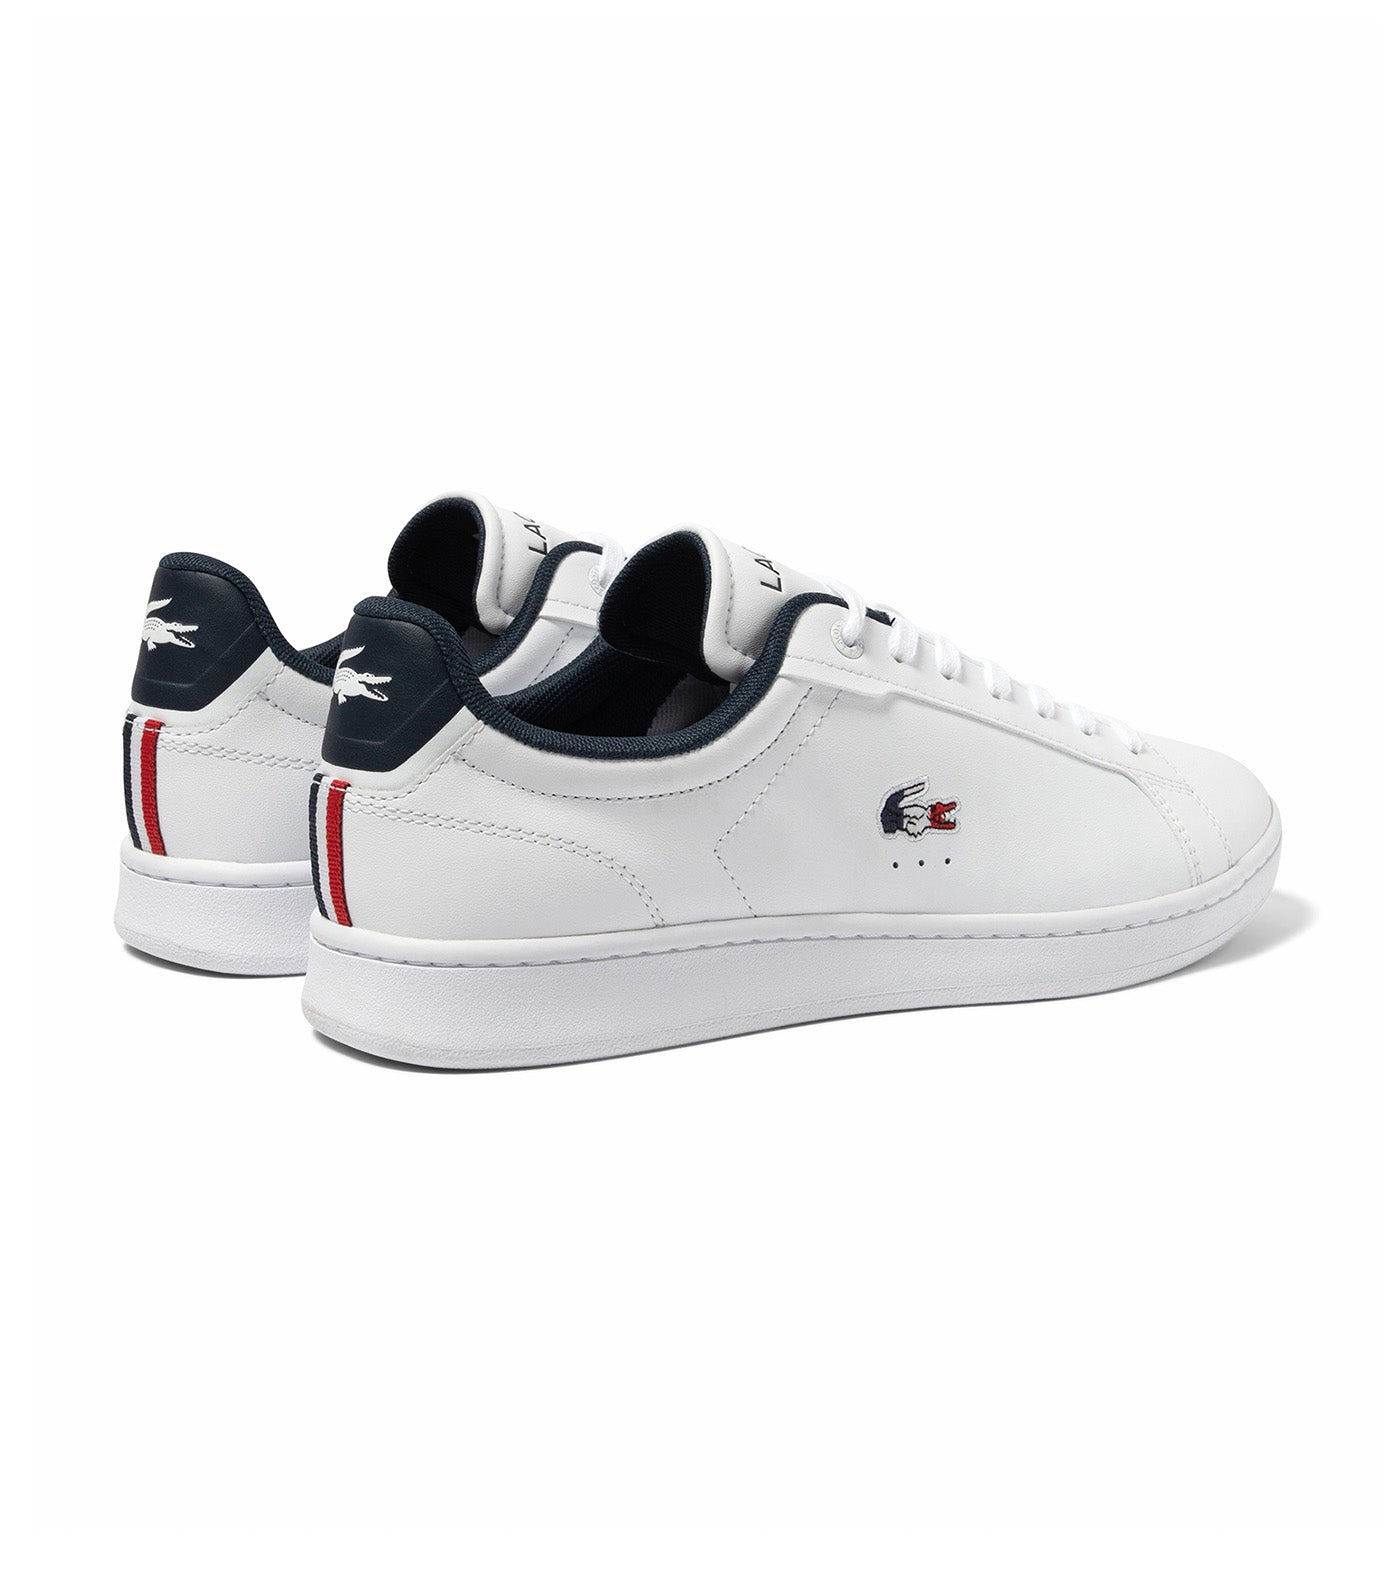 Men's Lacoste Carnaby Pro Leather Tricolour Trainers White/Navy/Red